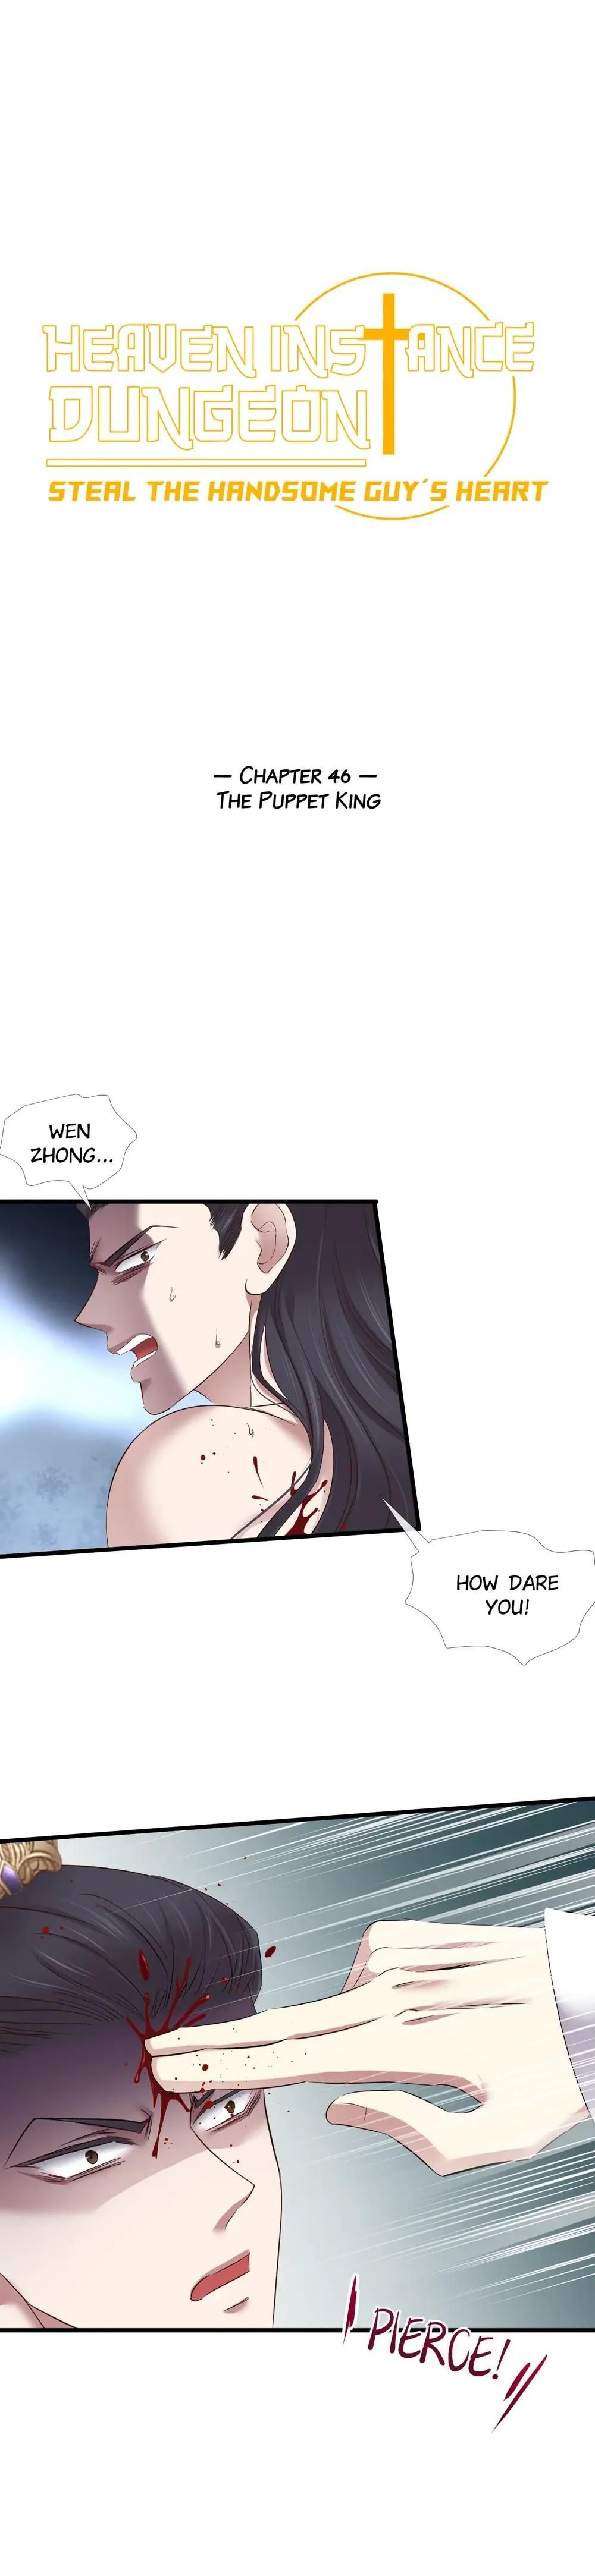 Heaven Instance Dungeon: Steal the Handsome Guy’s Heart Chapter 46 - Page 2